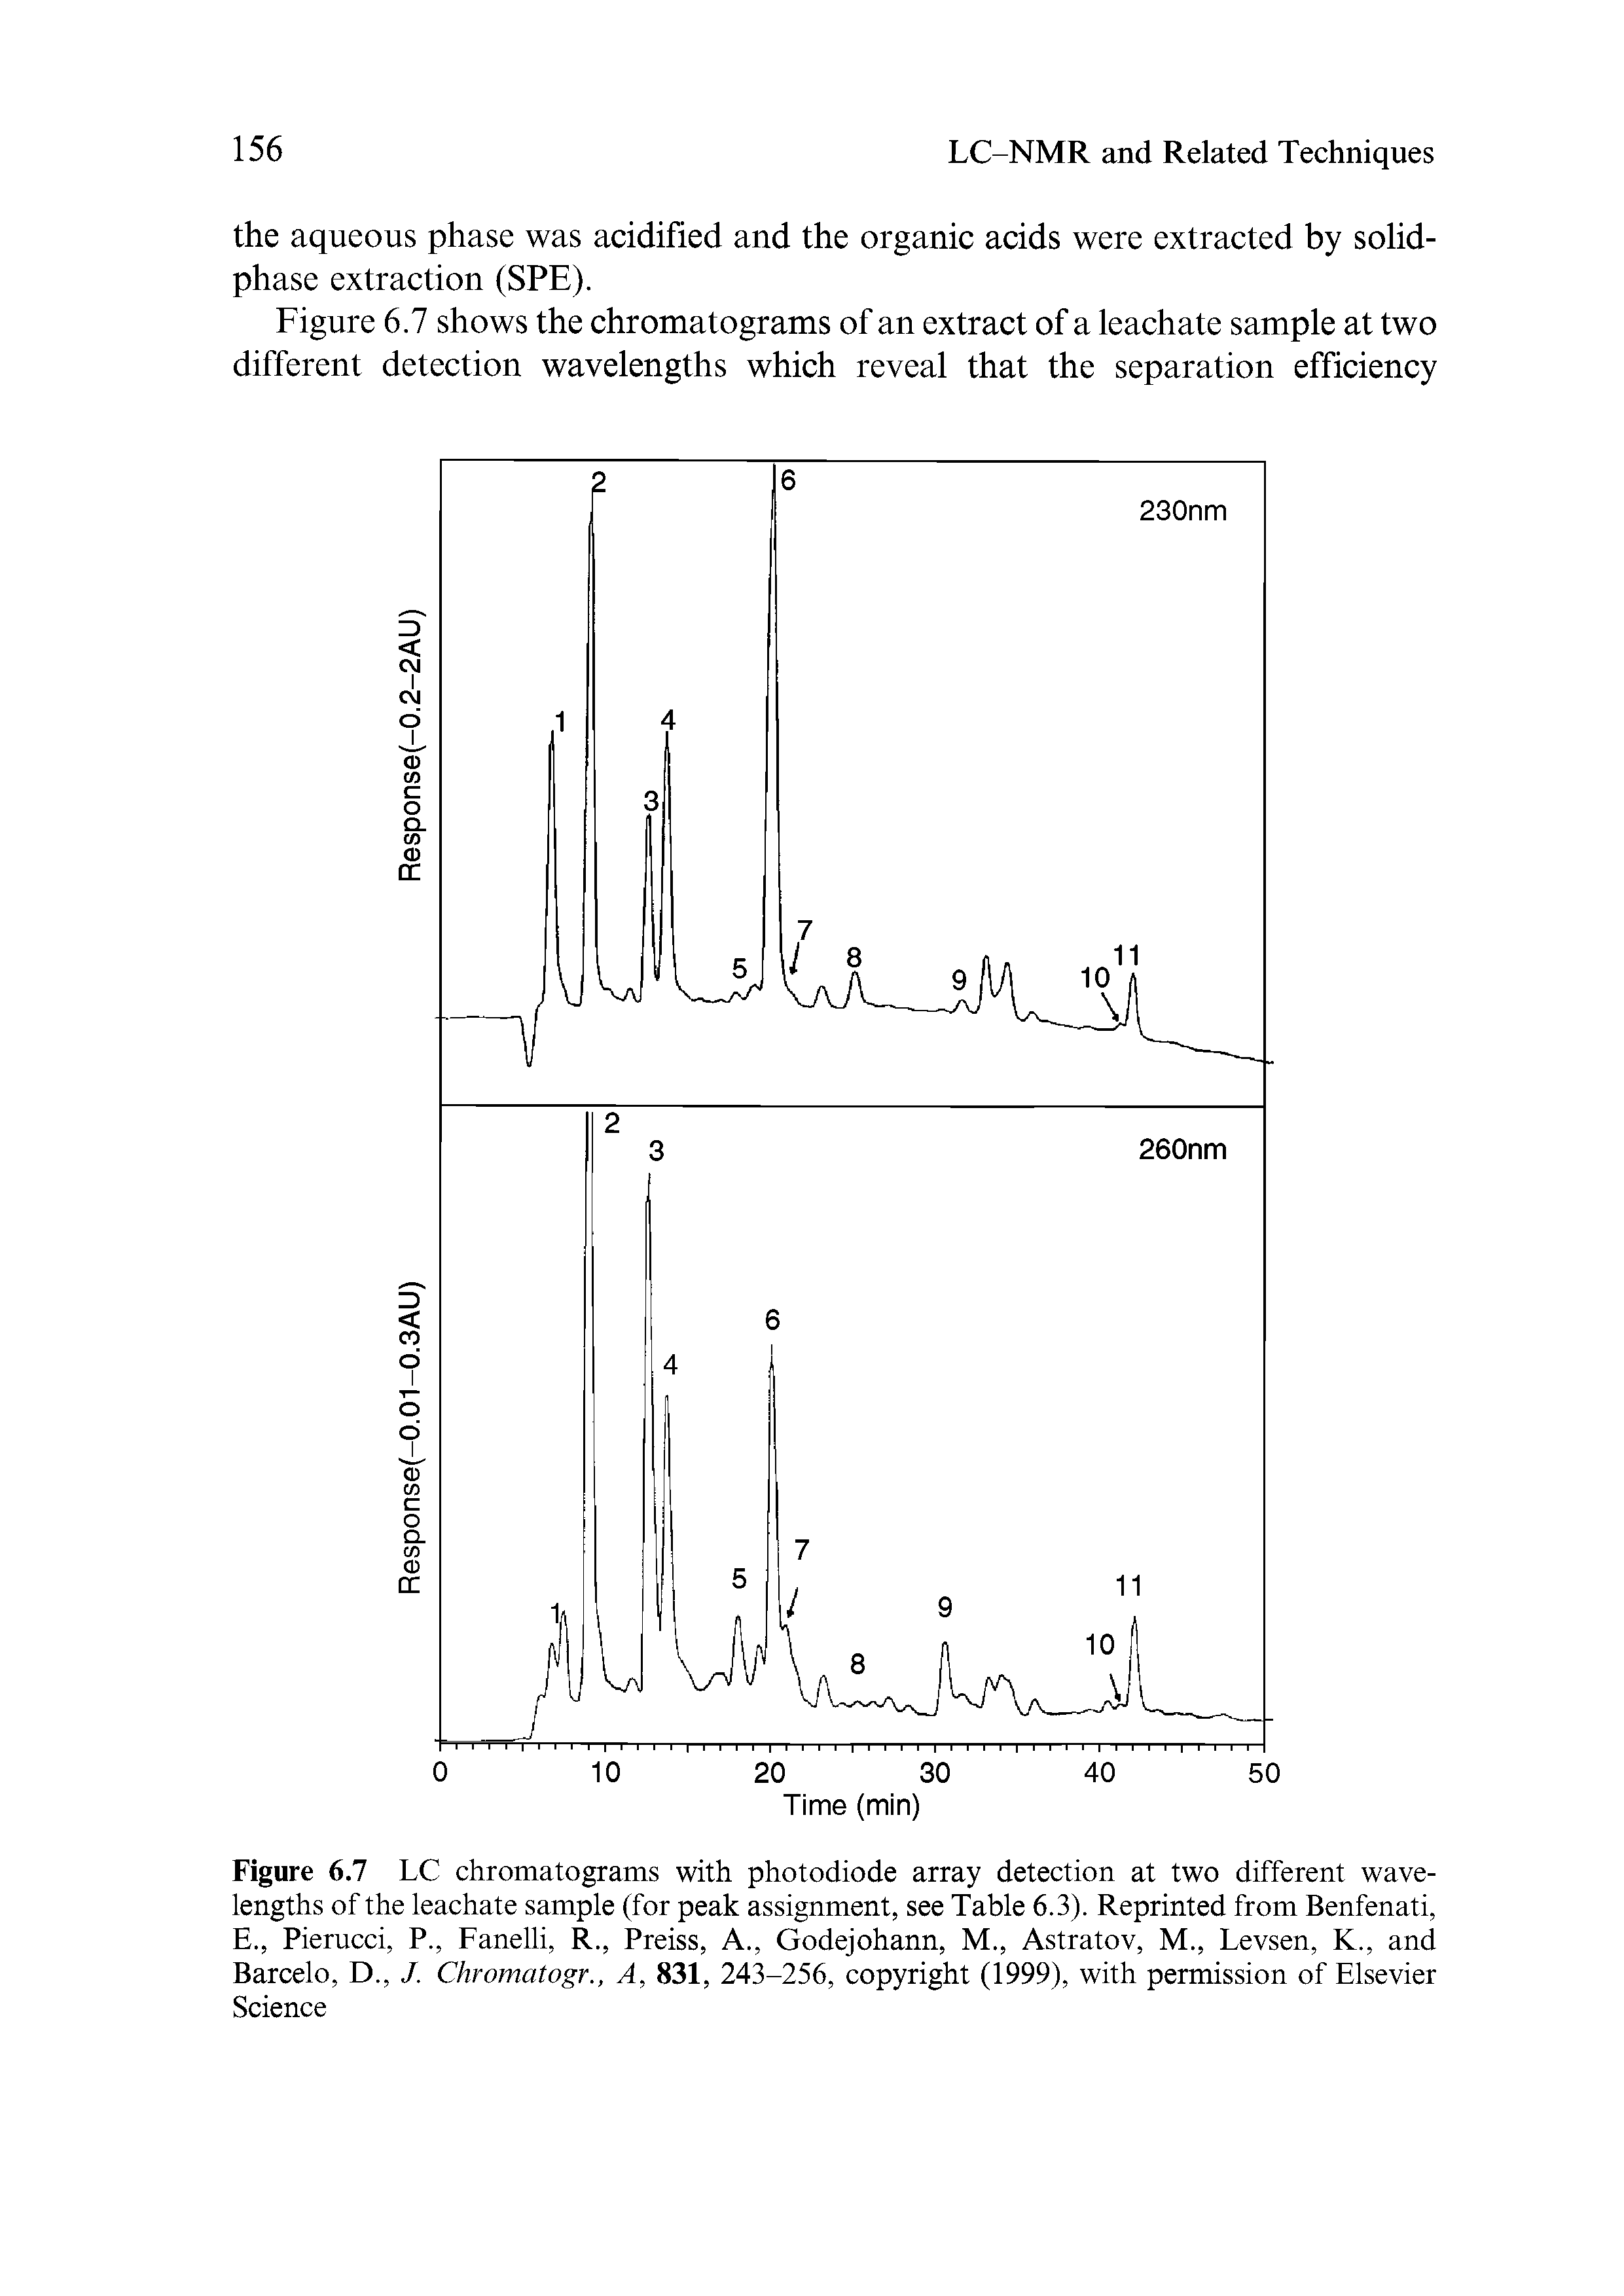 Figure 6.7 LC chromatograms with photodiode array detection at two different wavelengths of the leachate sample (for peak assignment, see Table 6.3). Reprinted from Benfenati, E., Pierucci, P., Fanelli, R., Preiss, A., Godejohann, M., Astratov, M., Levsen, K., and Barcelo, D.,. /. Chromatogr., A, 831, 243-256, copyright (1999), with permission of Elsevier Science...